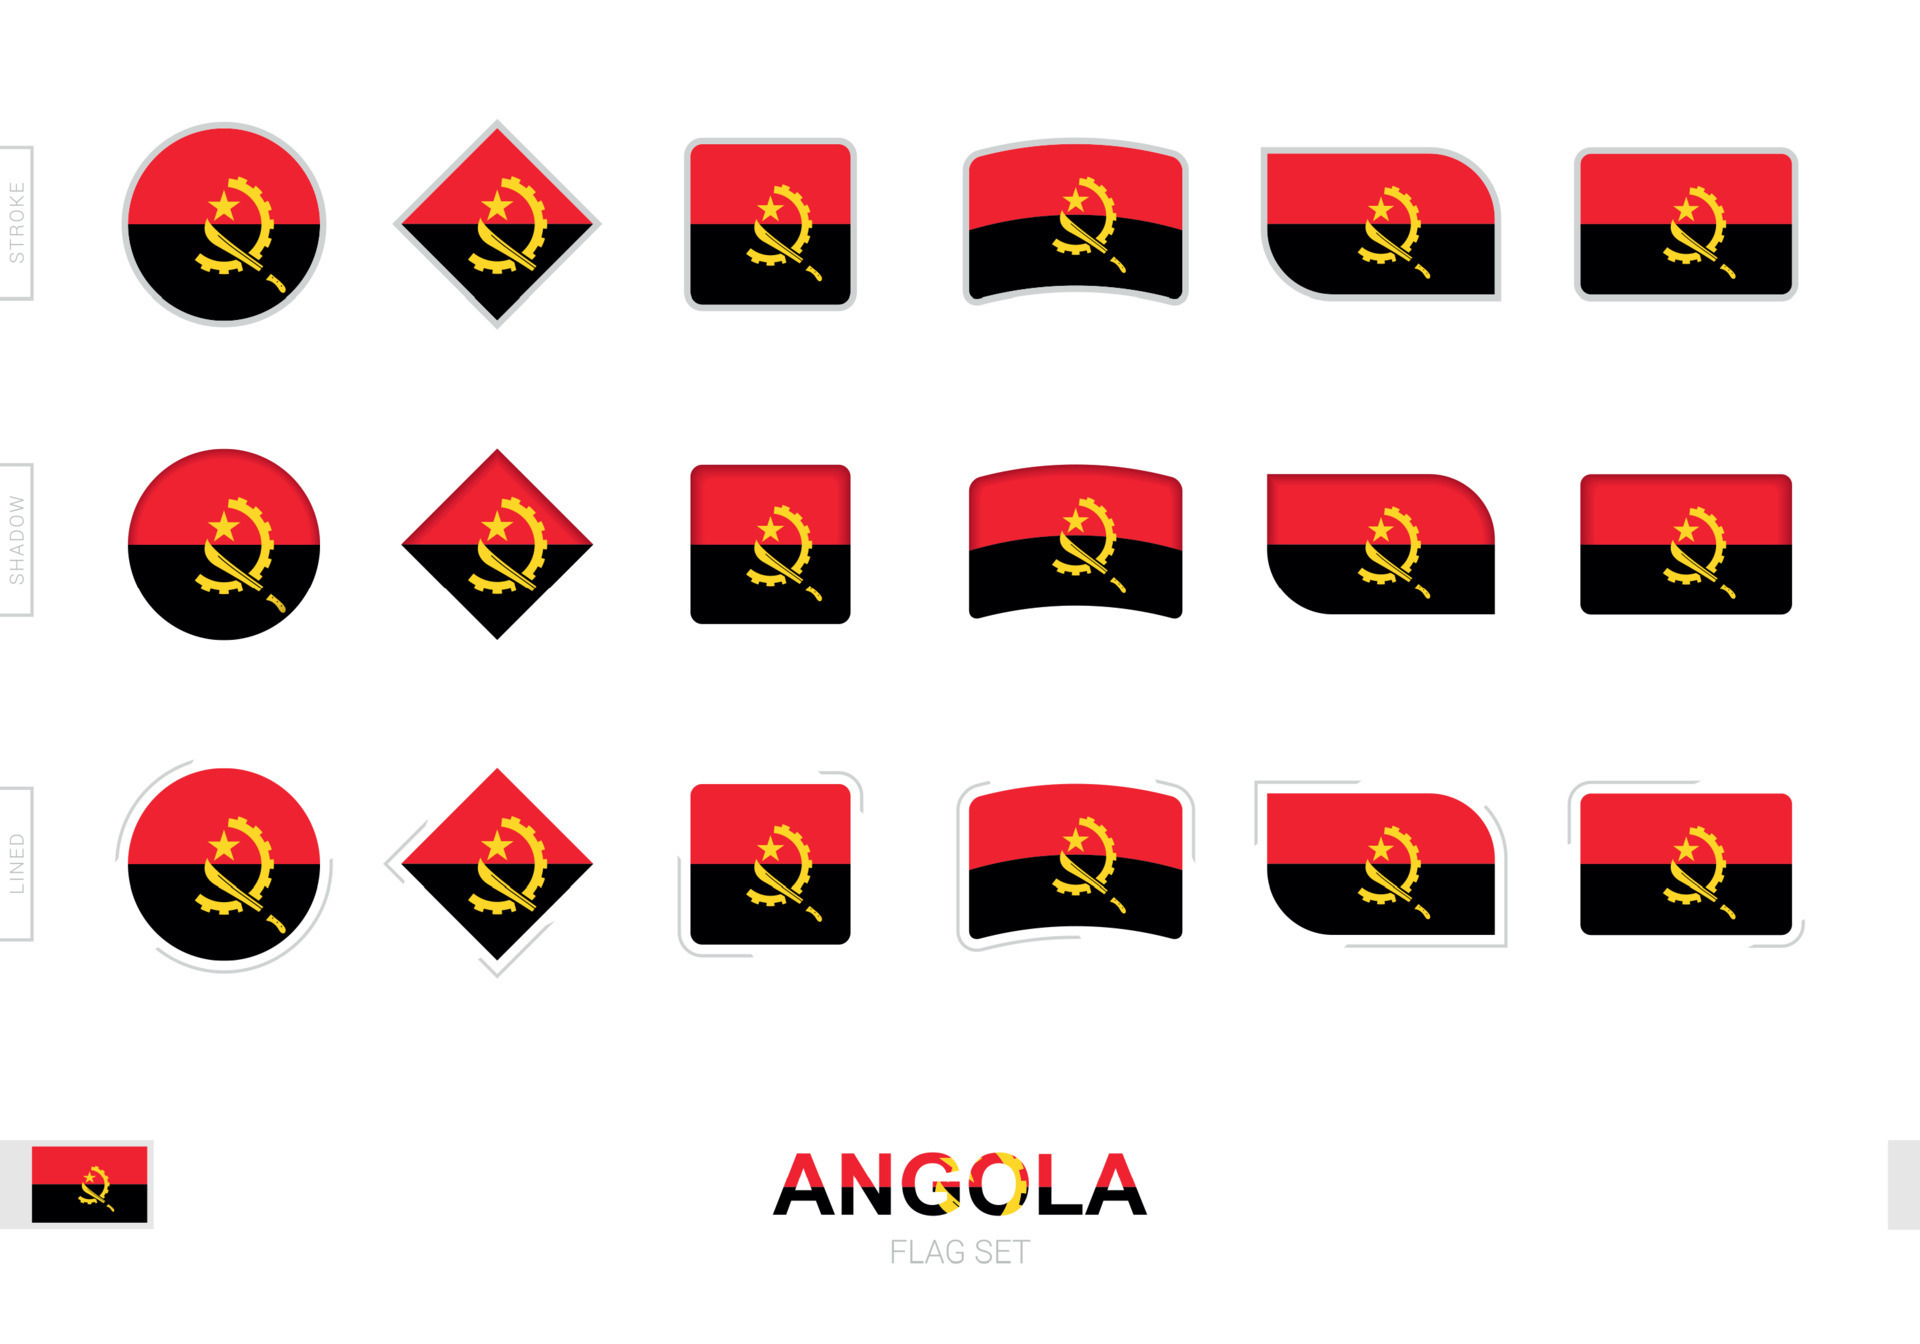 Angola flag set, simple flags of Angola with three different effects ...